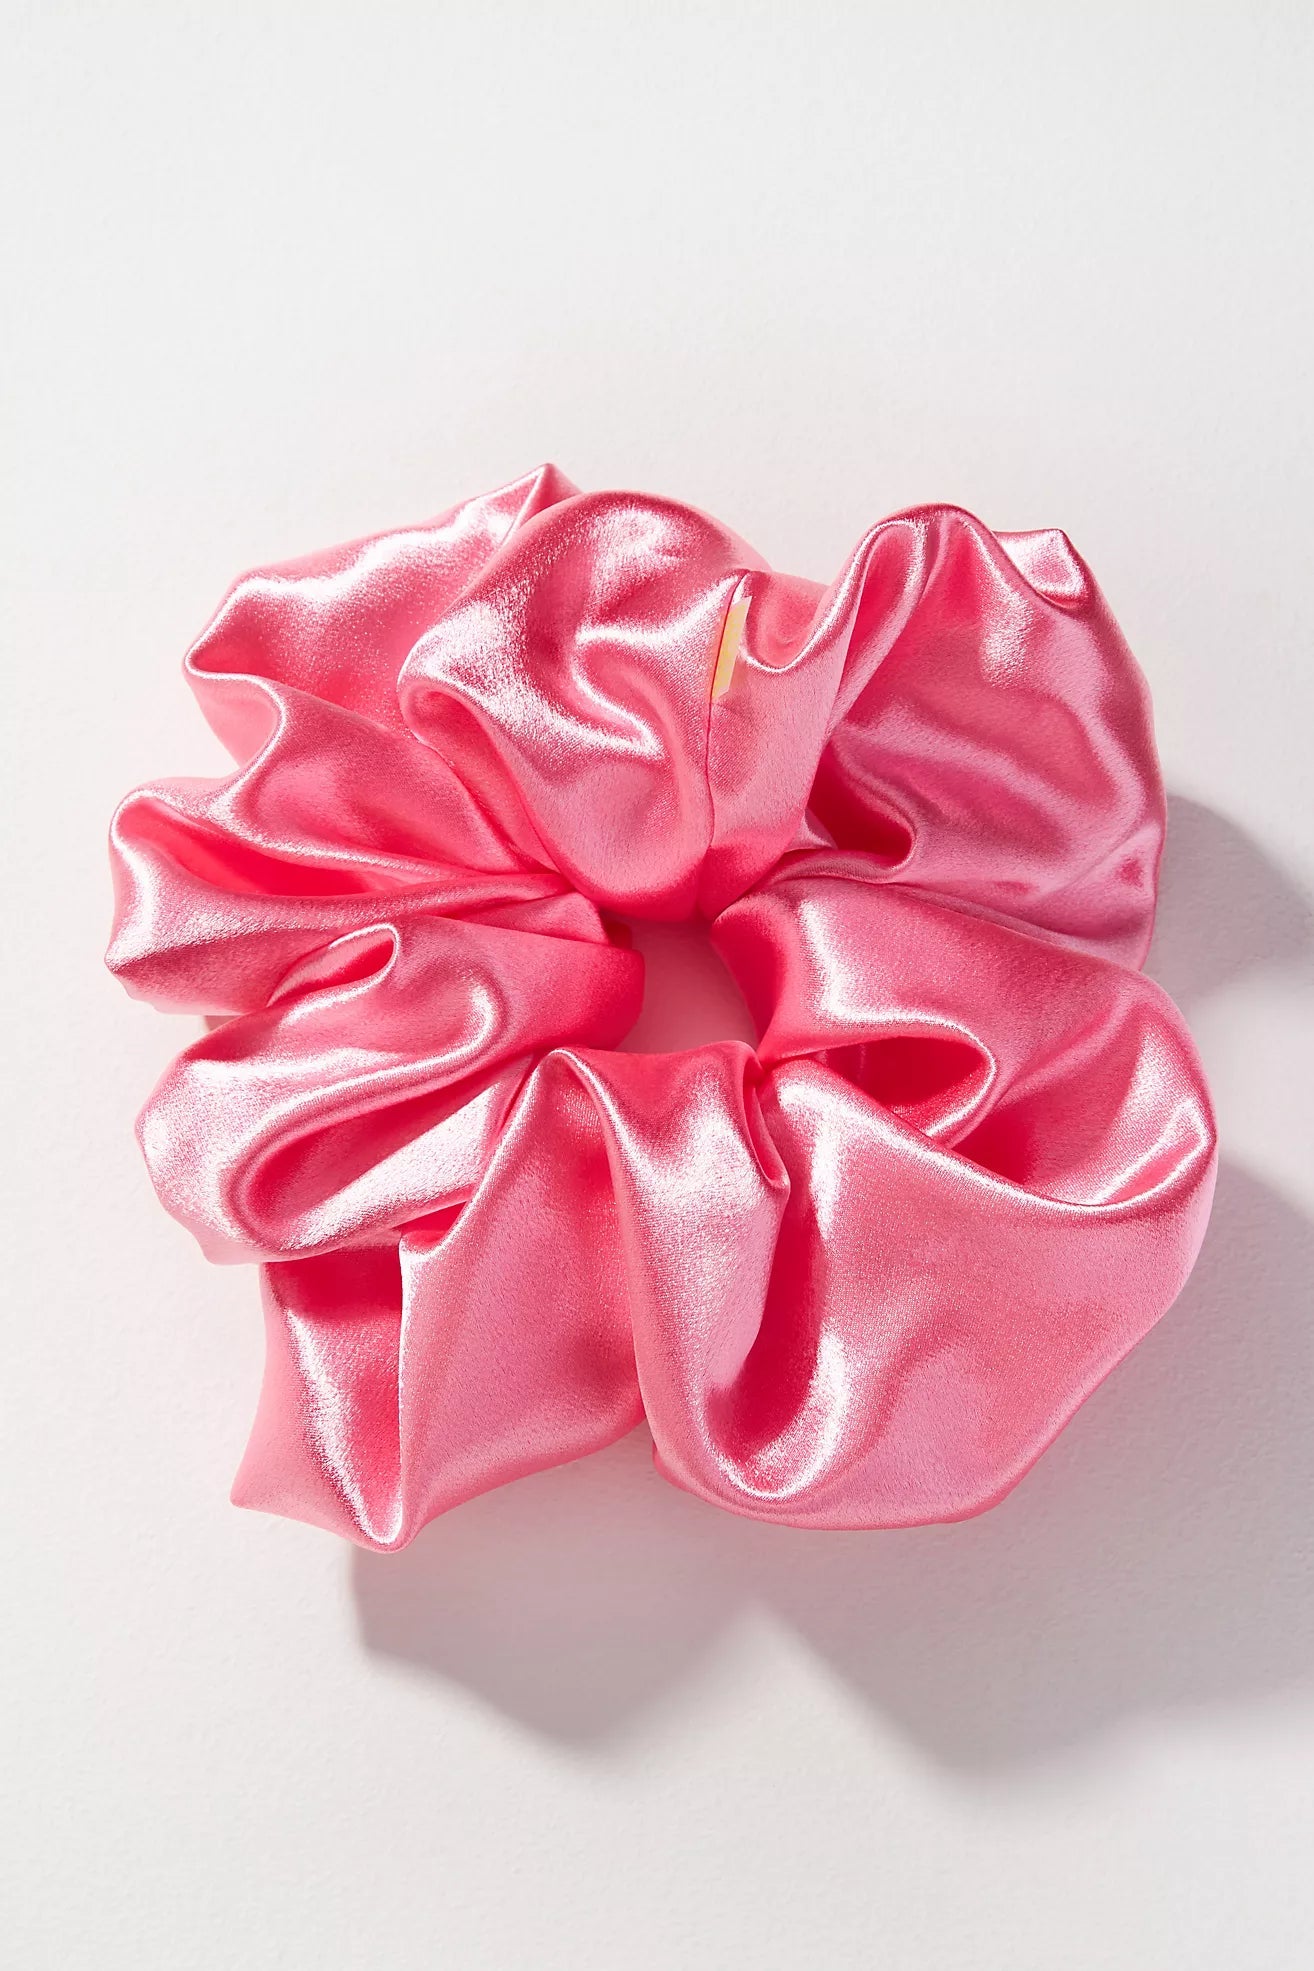 Room Shop | Giant Satin Scrunchie | Barbie Pink - Women's Hair Accessories - Blooming Daily